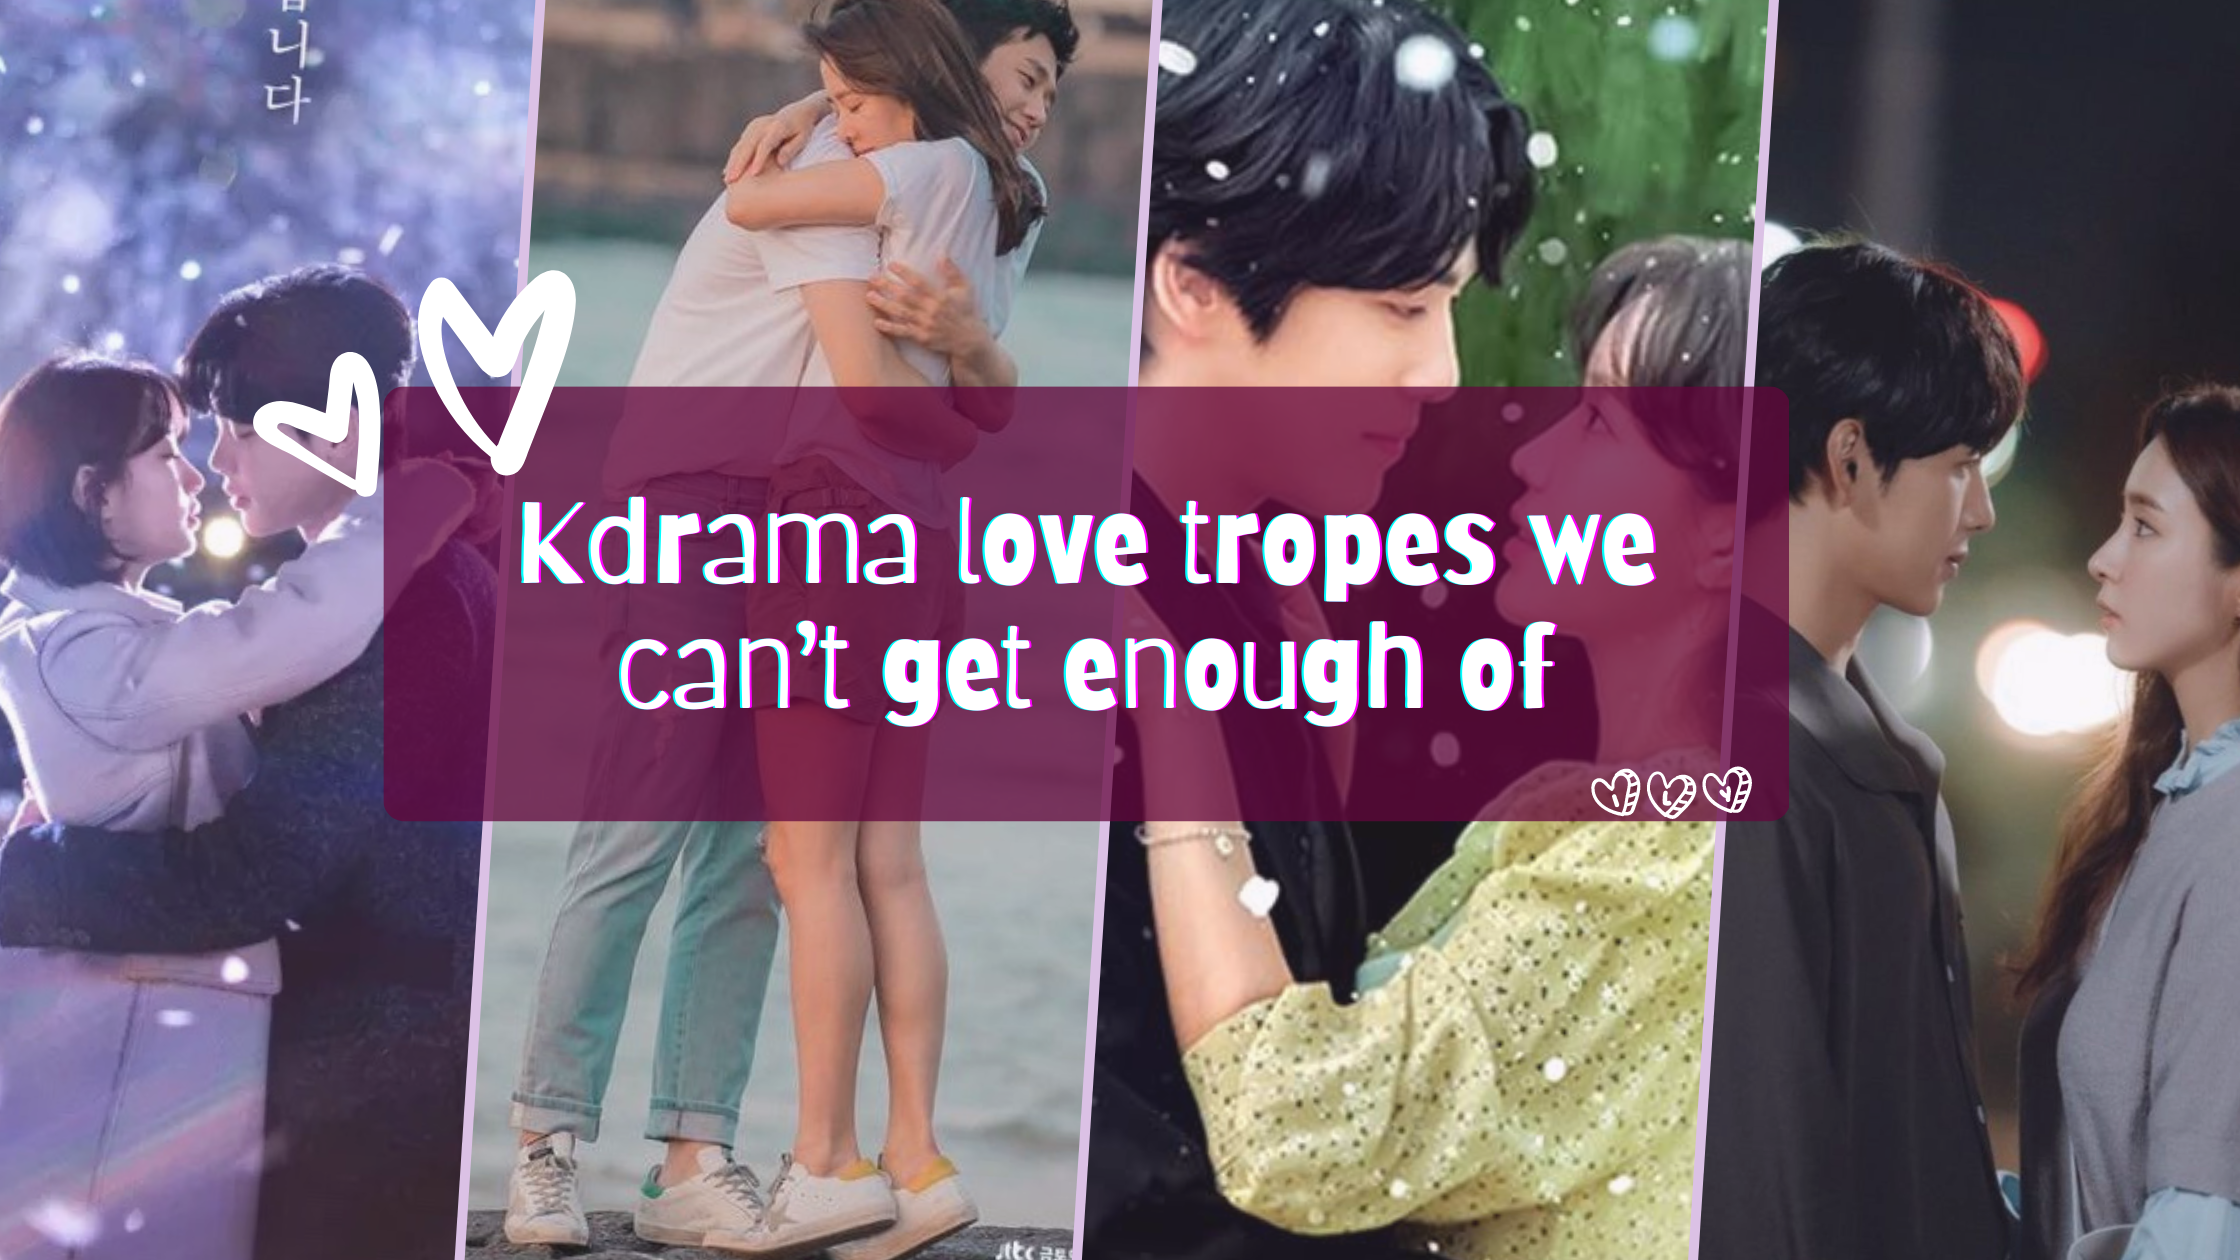 Kdrama love tropes we can’t get enough of